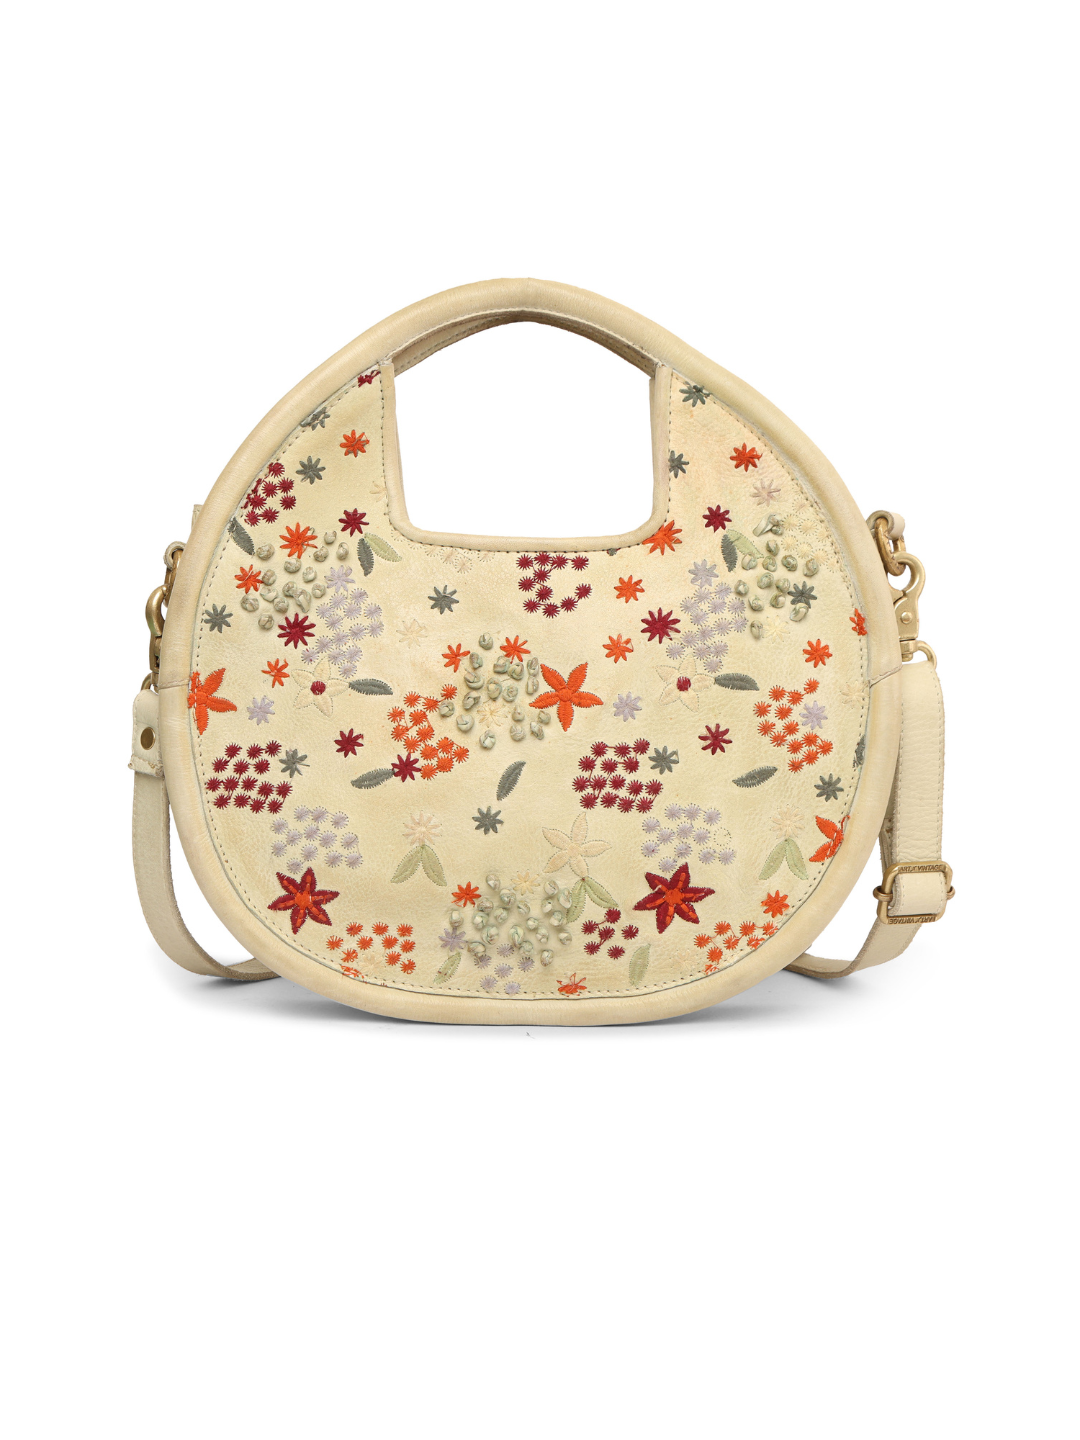 Floral Bliss: Round L.Green Leather Handbag with Flower Embroidery